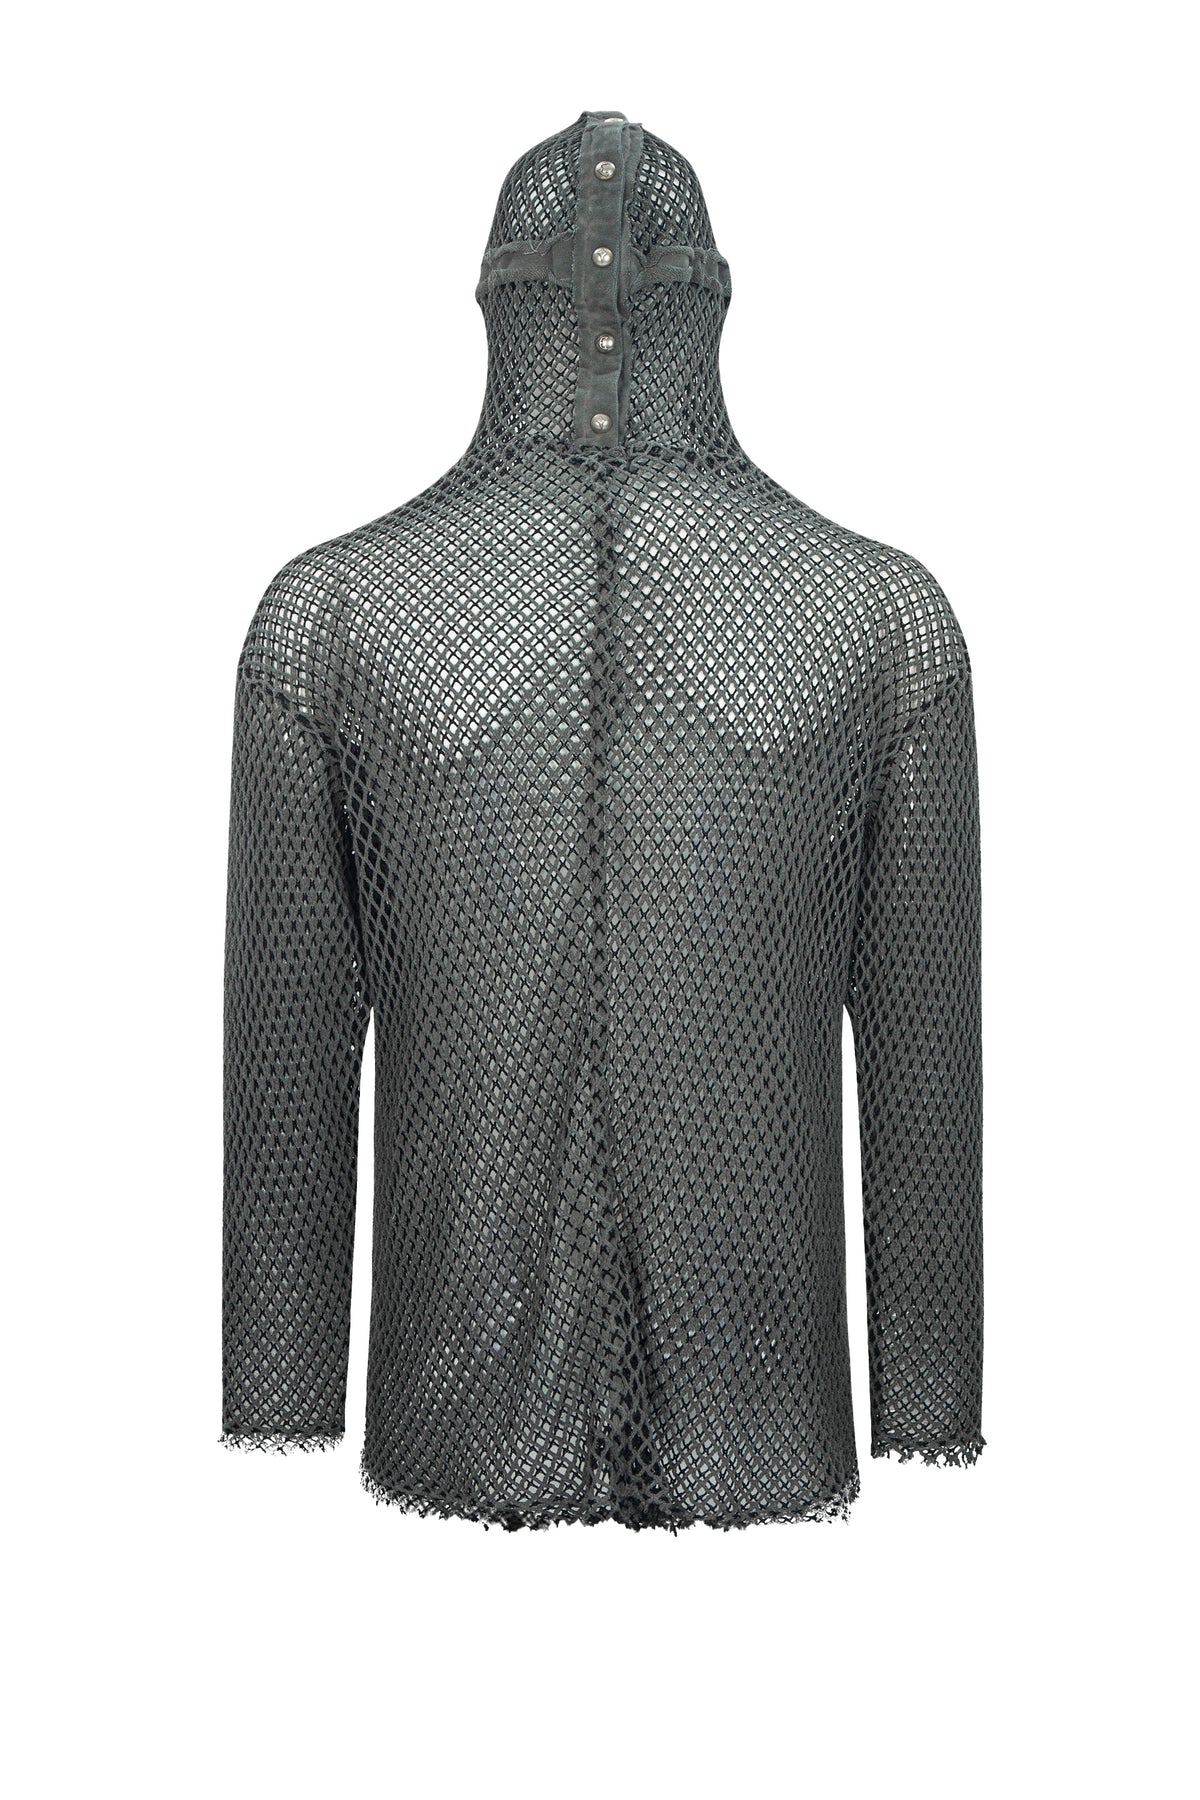 MITHRIL ARMOUR HOODED SLEEVE / GRY